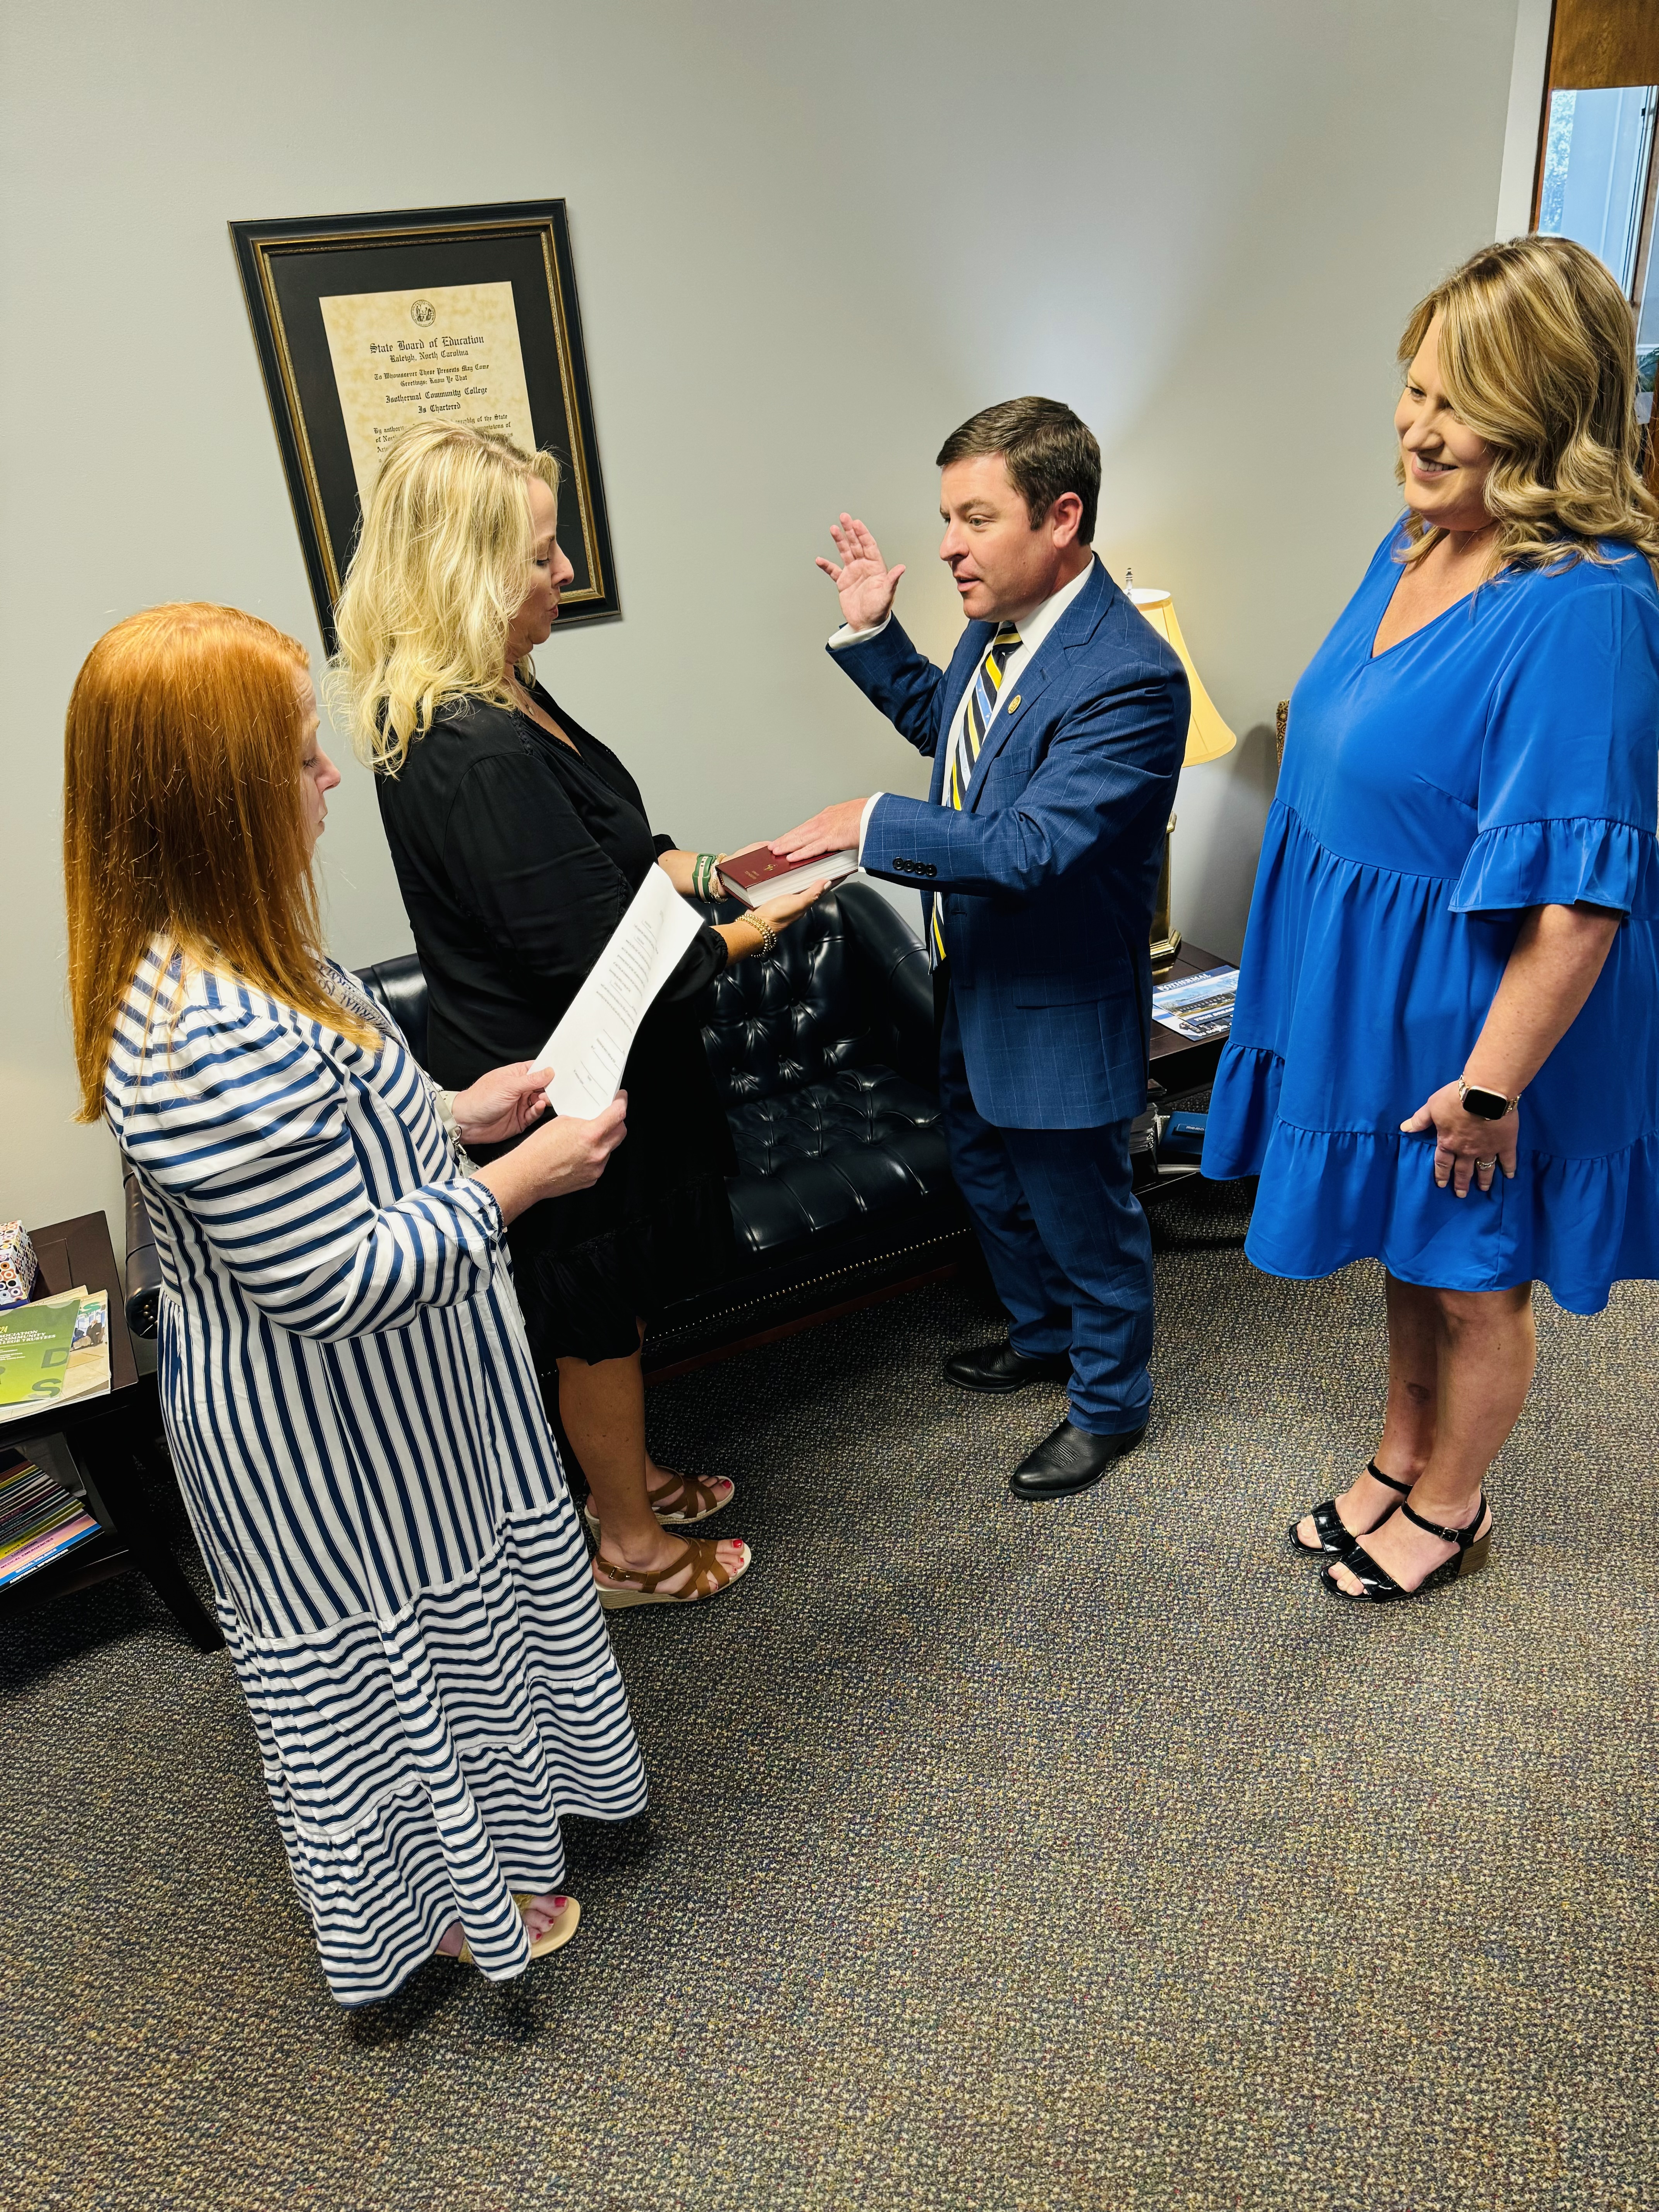 Jordan Barnes is pictured with his hand on a bible being sworn in as a new member of the Isothermal Community College Board of Trustees.